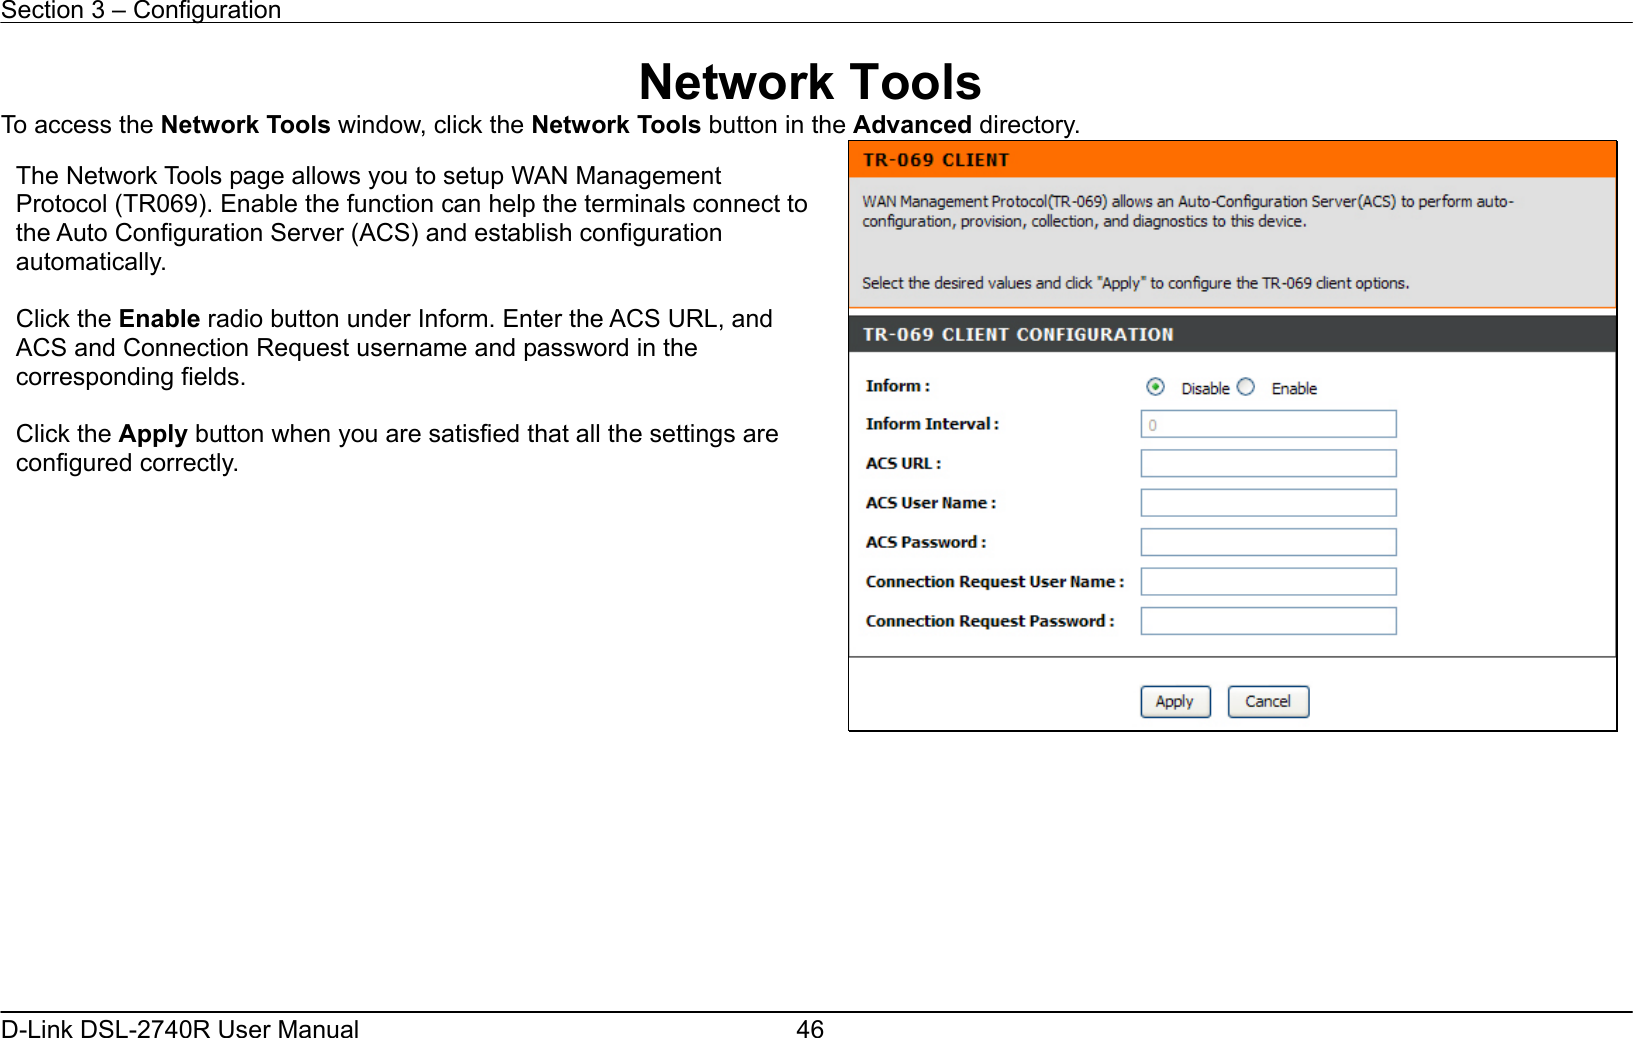 Section 3 – Configuration   D-Link DSL-2740R User Manual  46Network Tools To access the Network Tools window, click the Network Tools button in the Advanced directory.           The Network Tools page allows you to setup WAN Management Protocol (TR069). Enable the function can help the terminals connect to the Auto Configuration Server (ACS) and establish configuration automatically.  Click the Enable radio button under Inform. Enter the ACS URL, and ACS and Connection Request username and password in the corresponding fields.  Click the Apply button when you are satisfied that all the settings are configured correctly.   